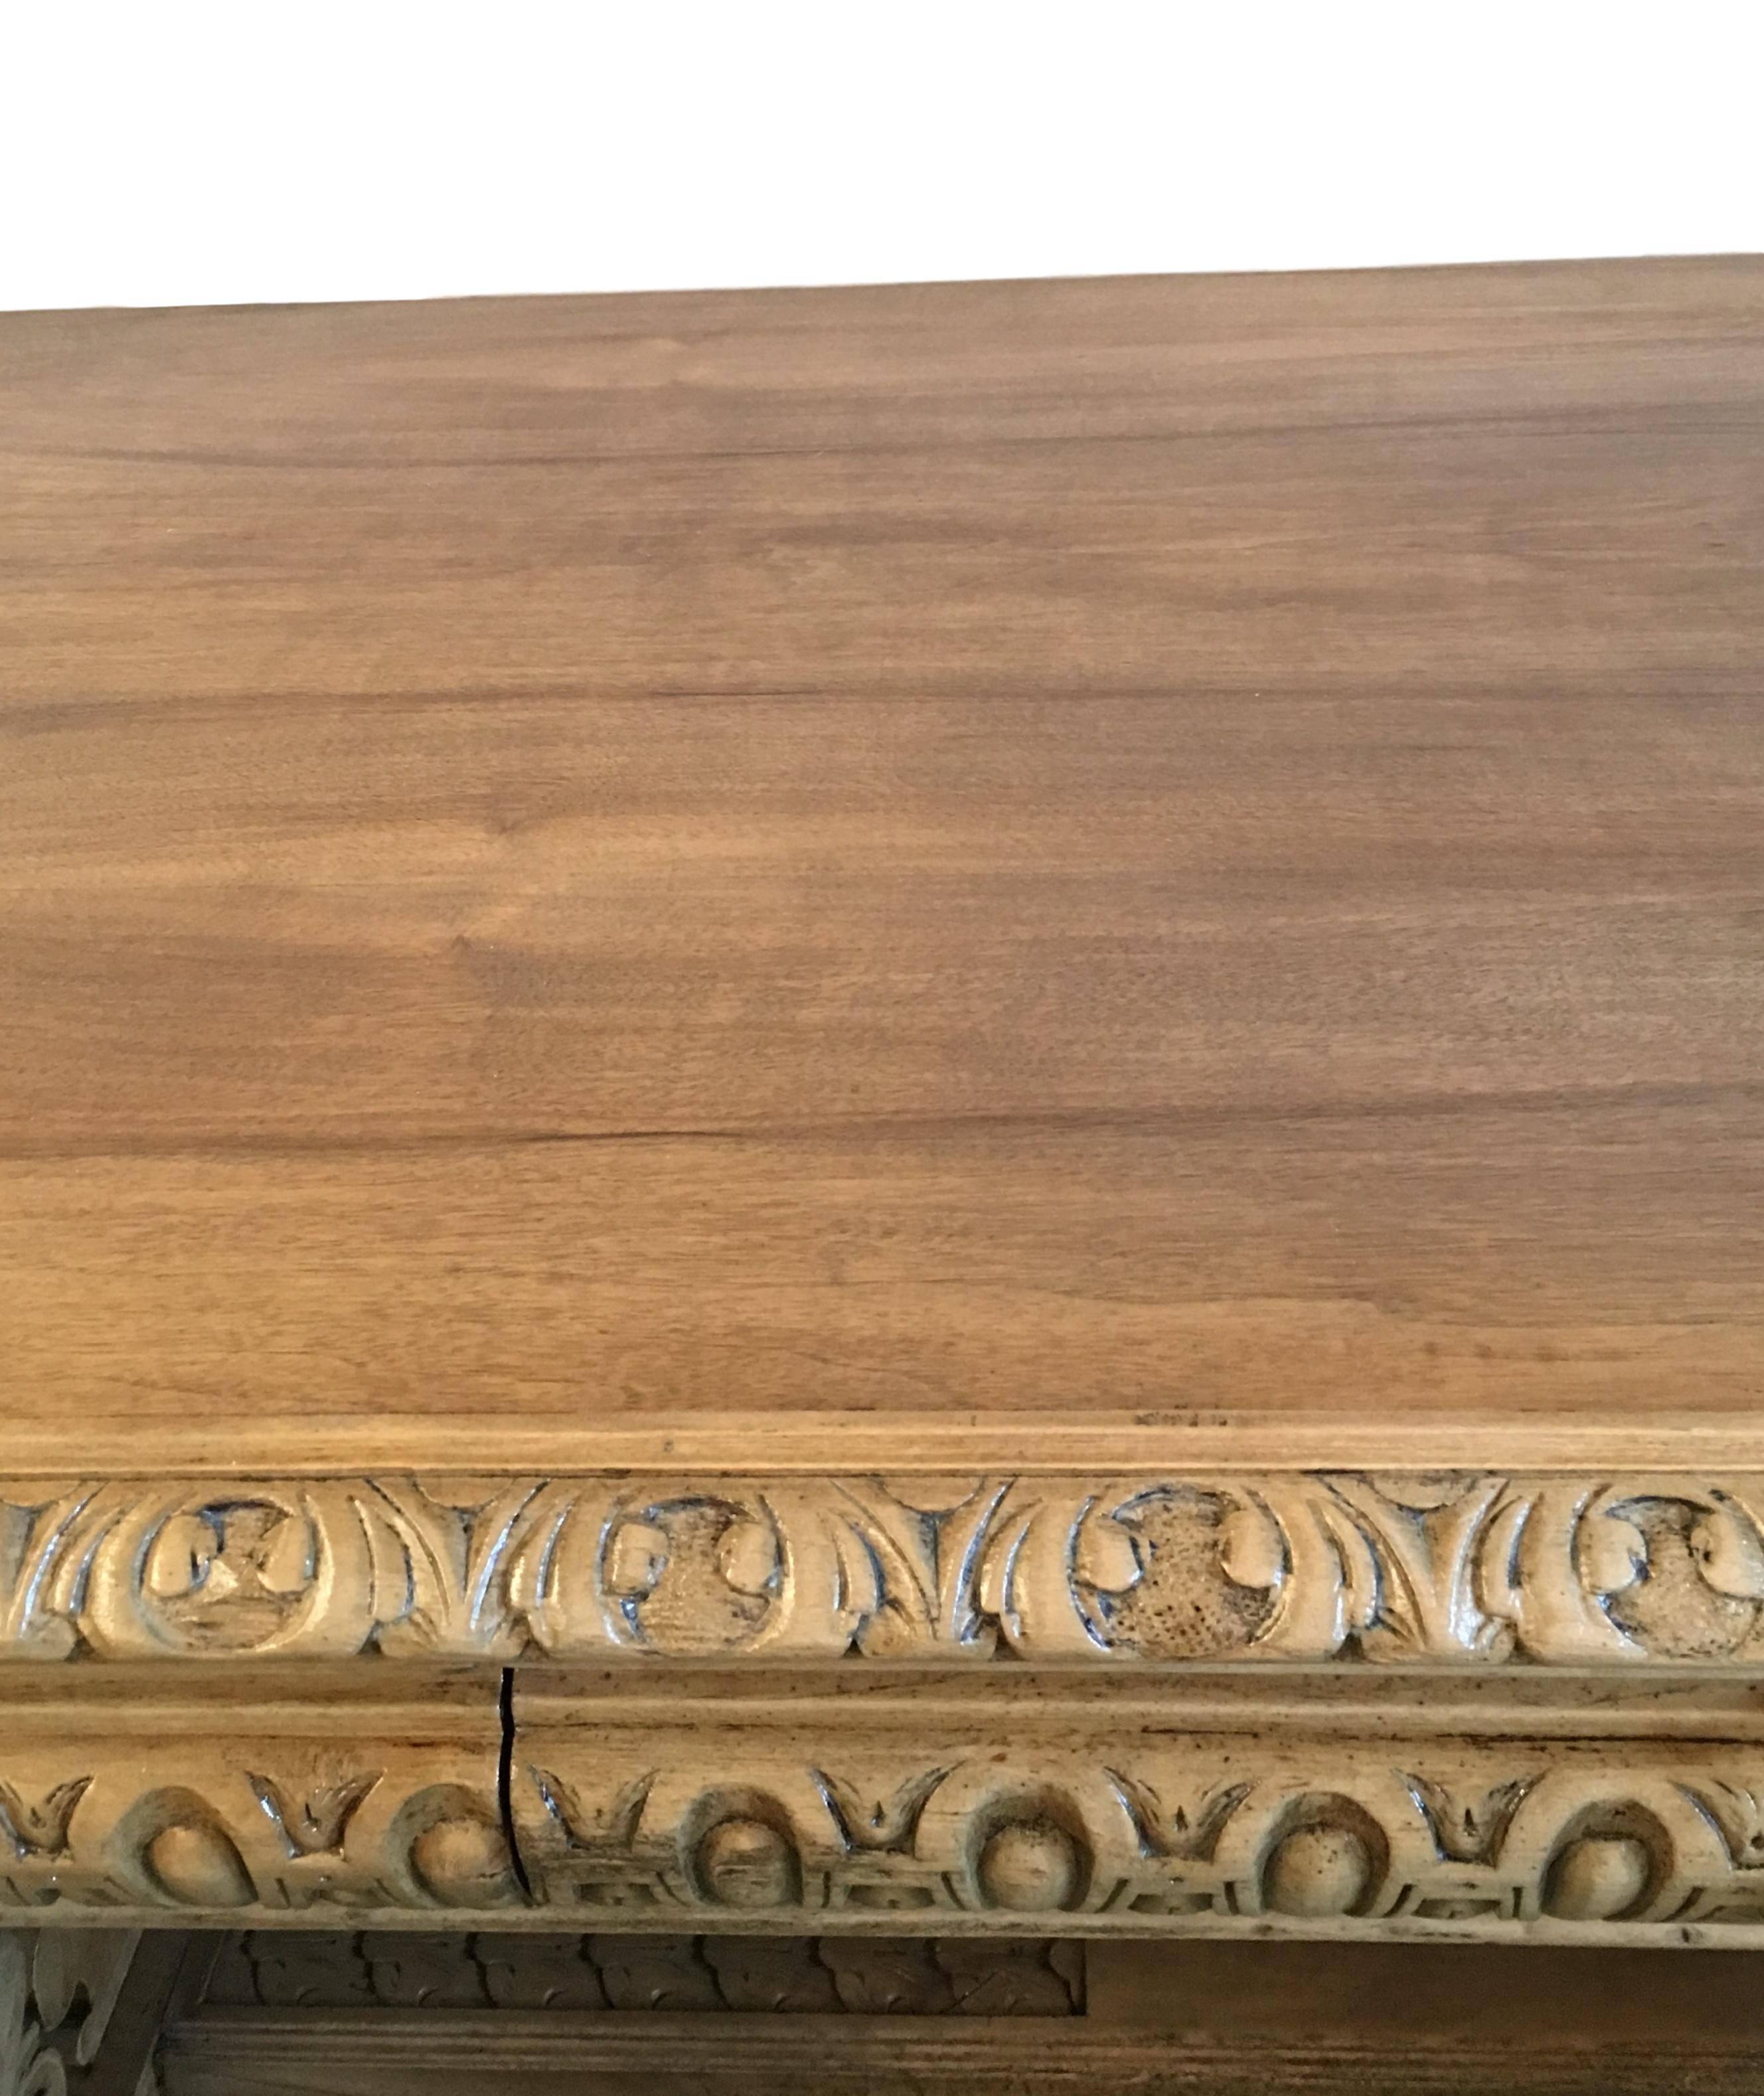 19th Spanish Carved Light and Bleached Walnut Library / Writing or Desk Table 3